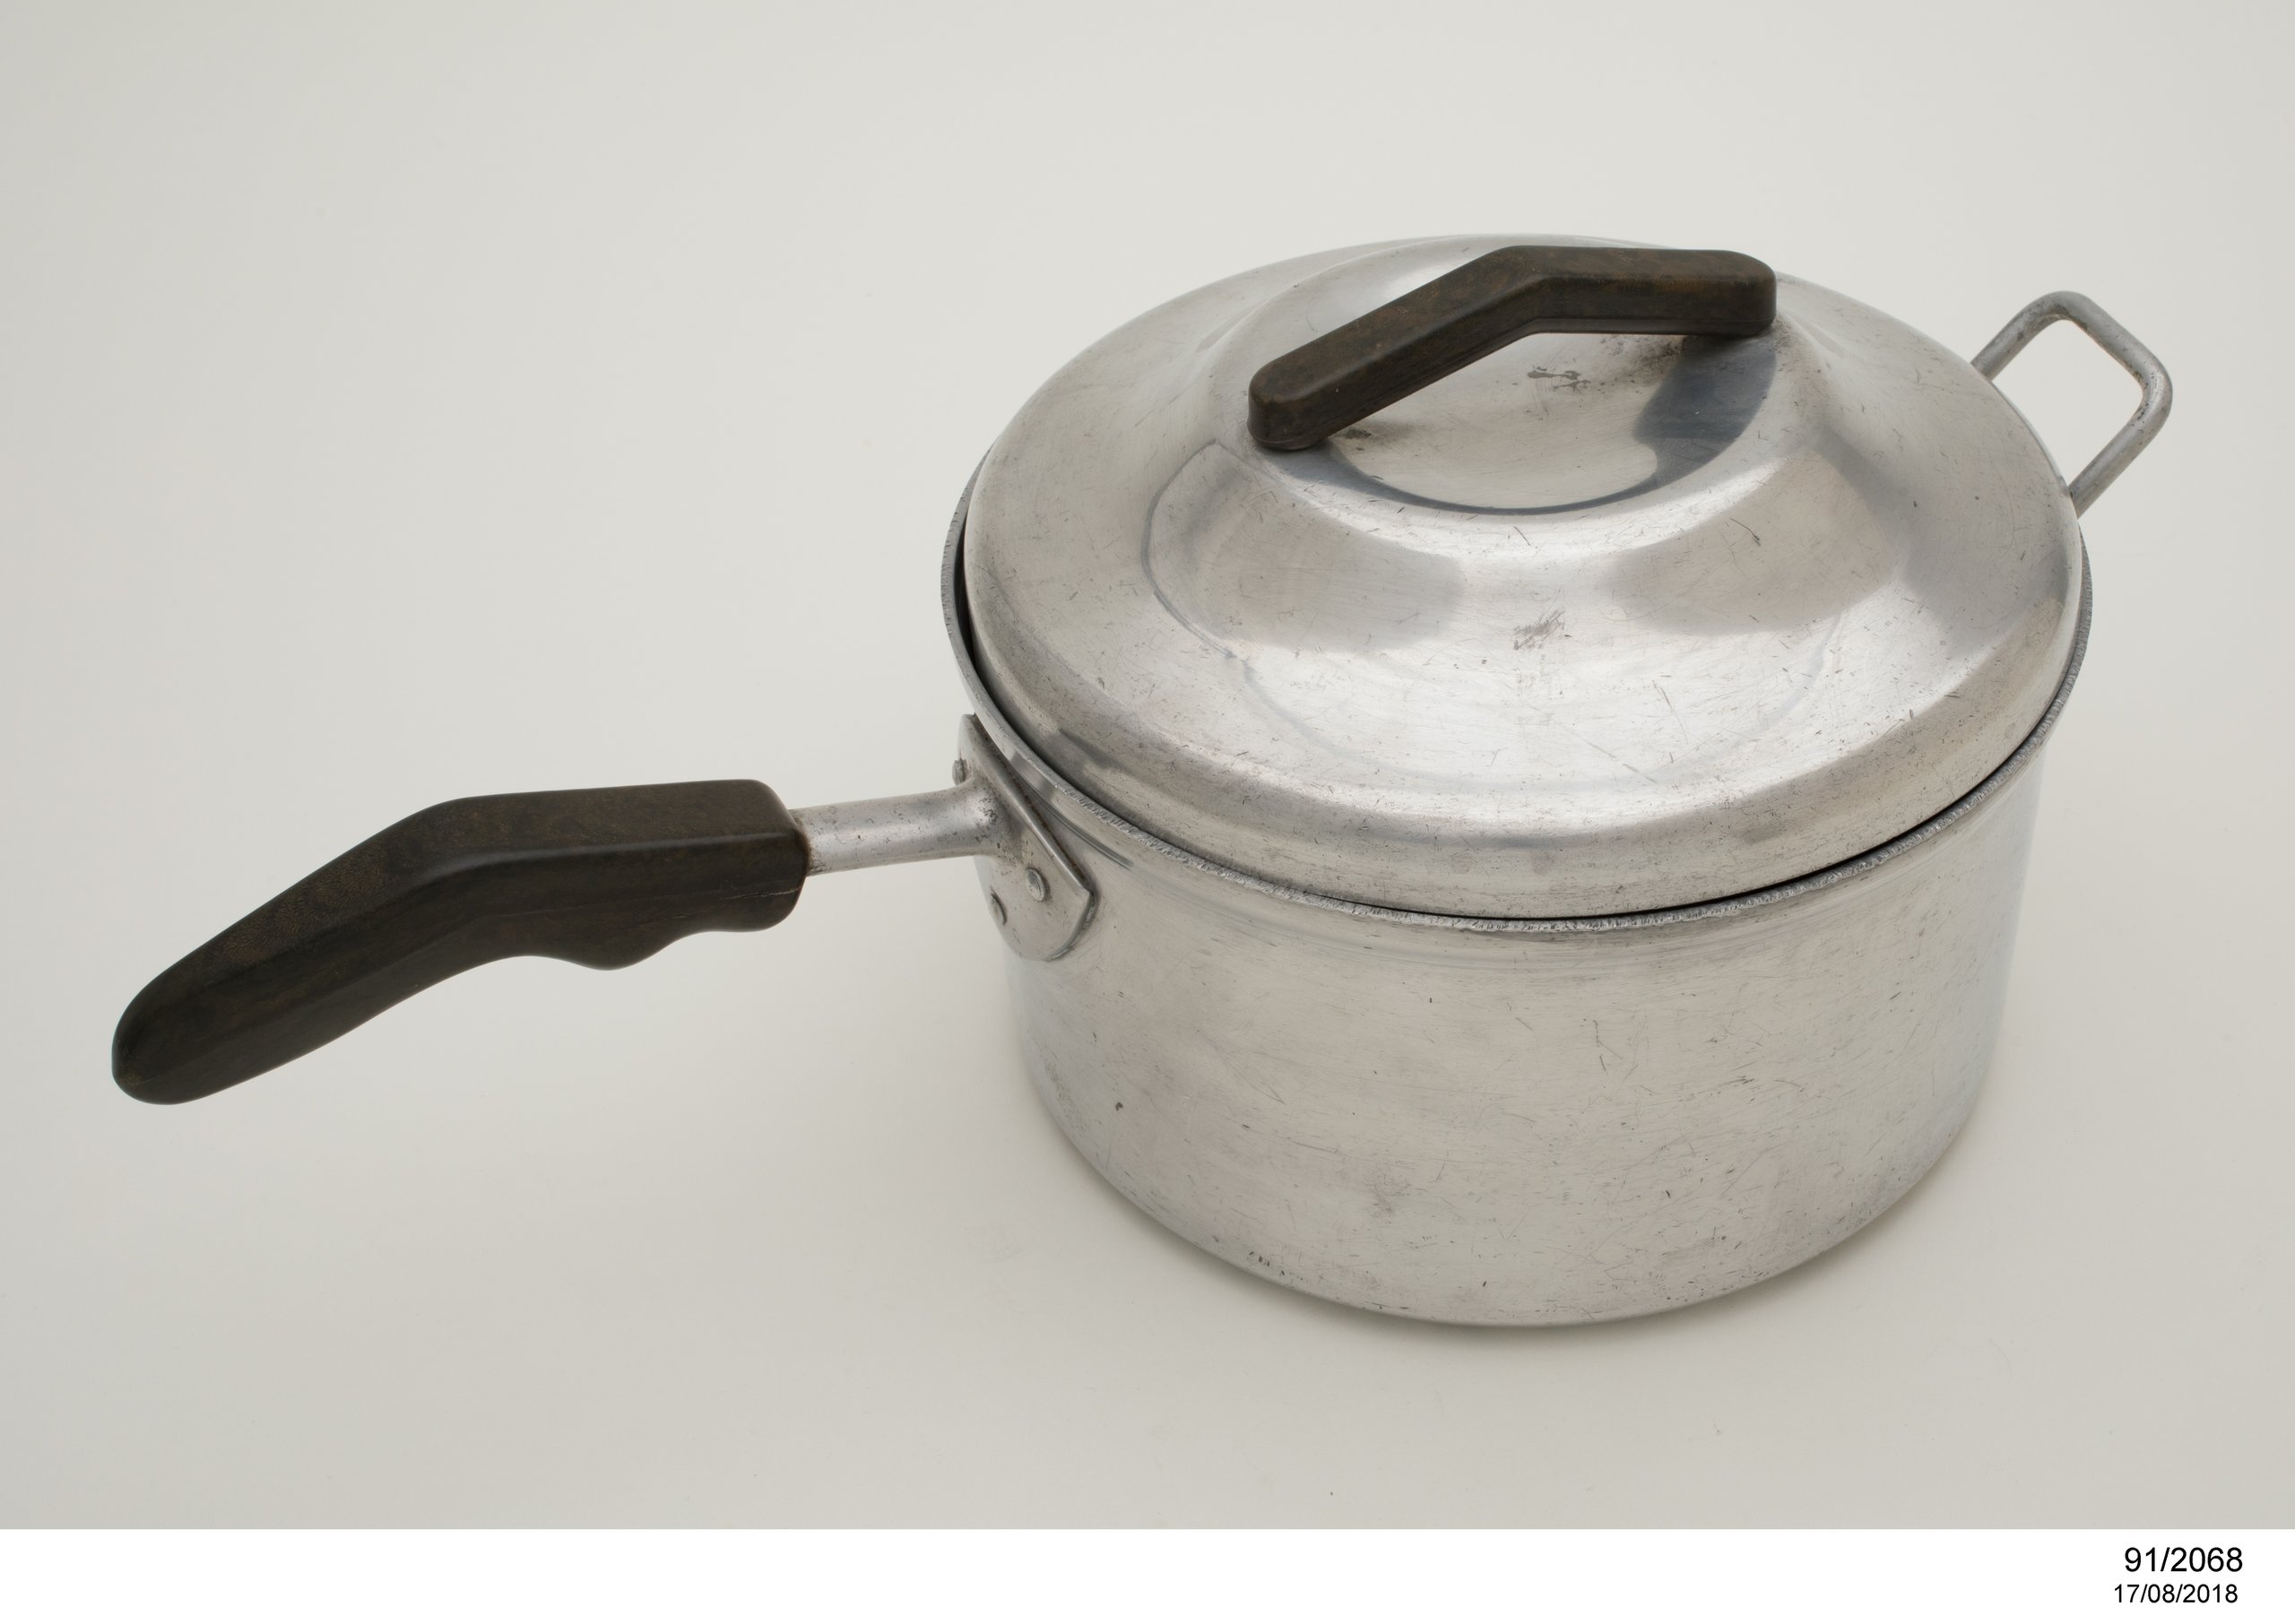 Saucepan with lid designed by Gordon Andrews